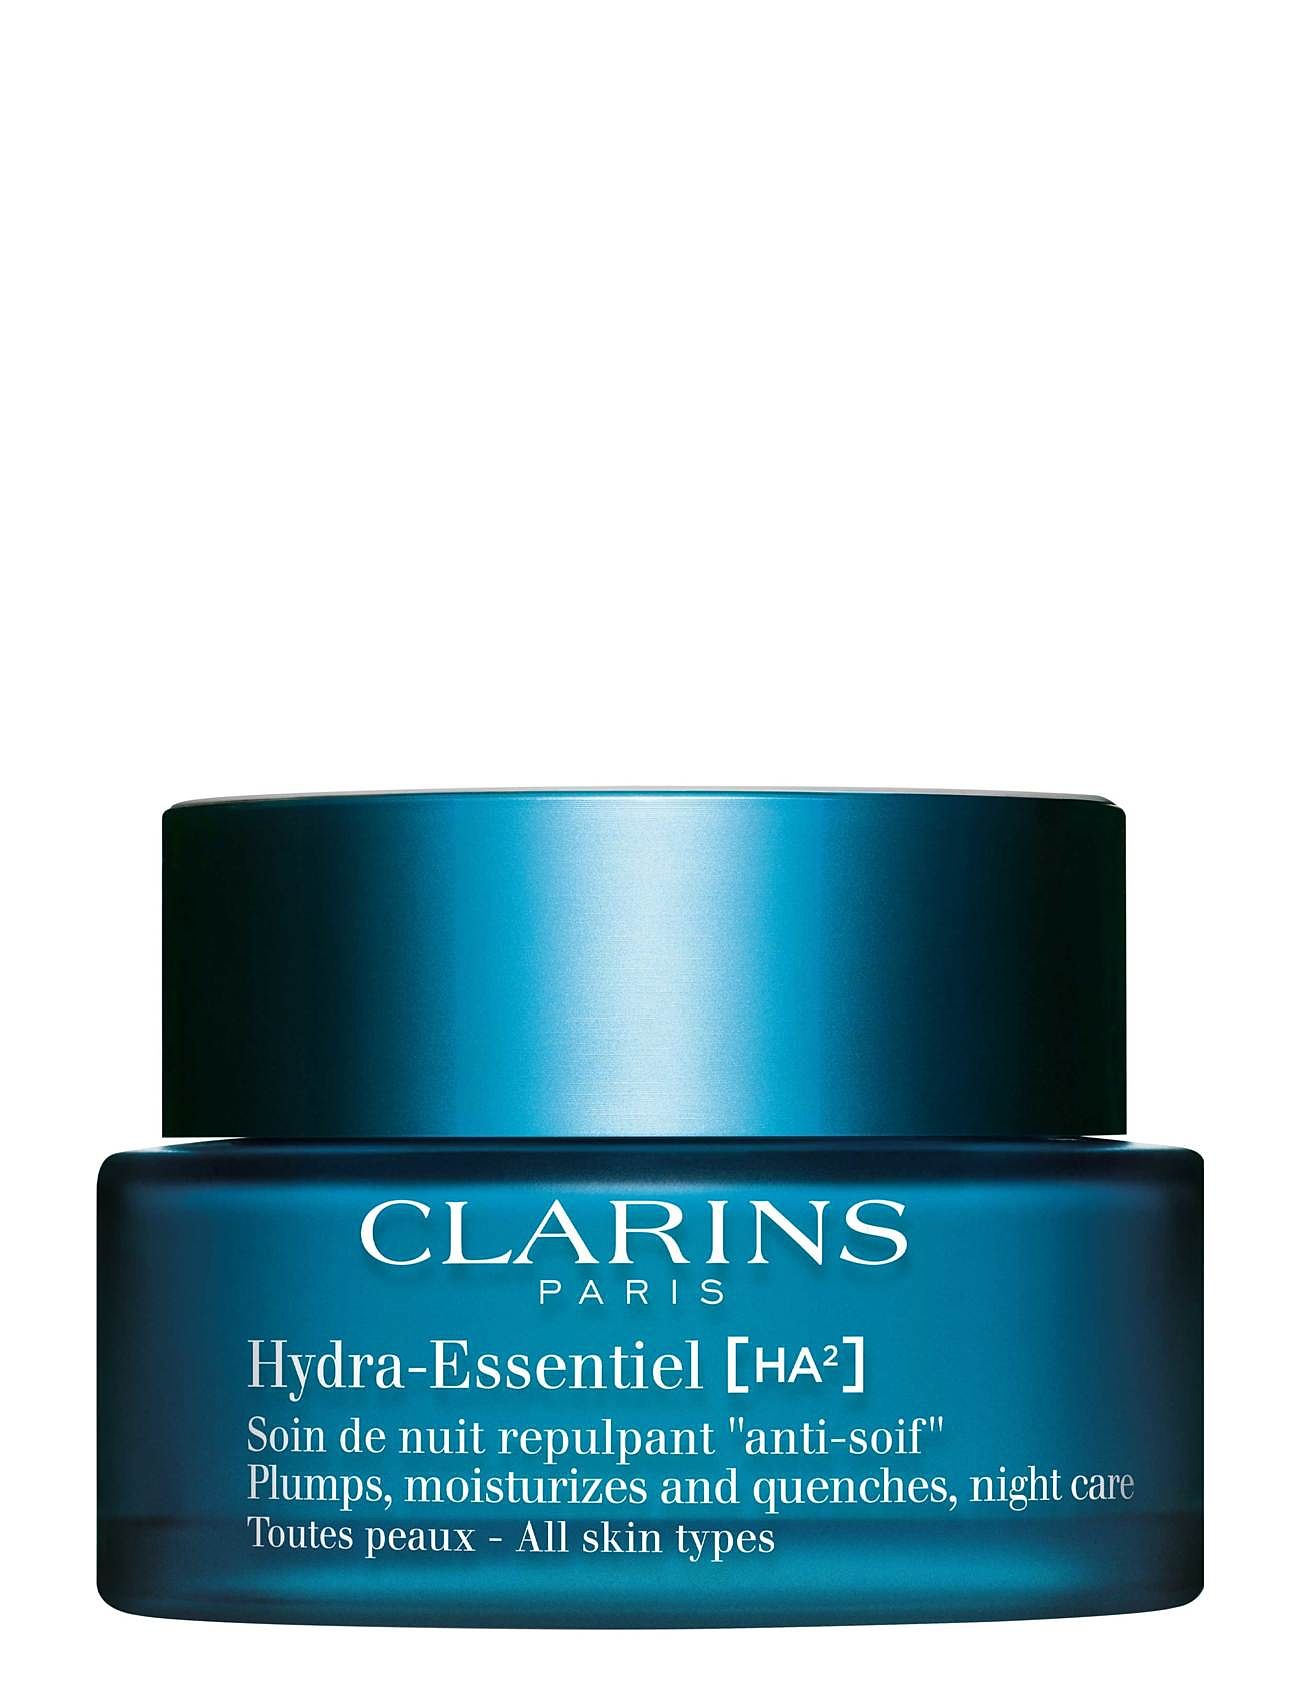 Hydra-Essentiel Plumps, Moisturizes And Quenches, Night Care - All Skin Types Beauty Women Skin Care Face Moisturizers Night Cream Nude Clarins